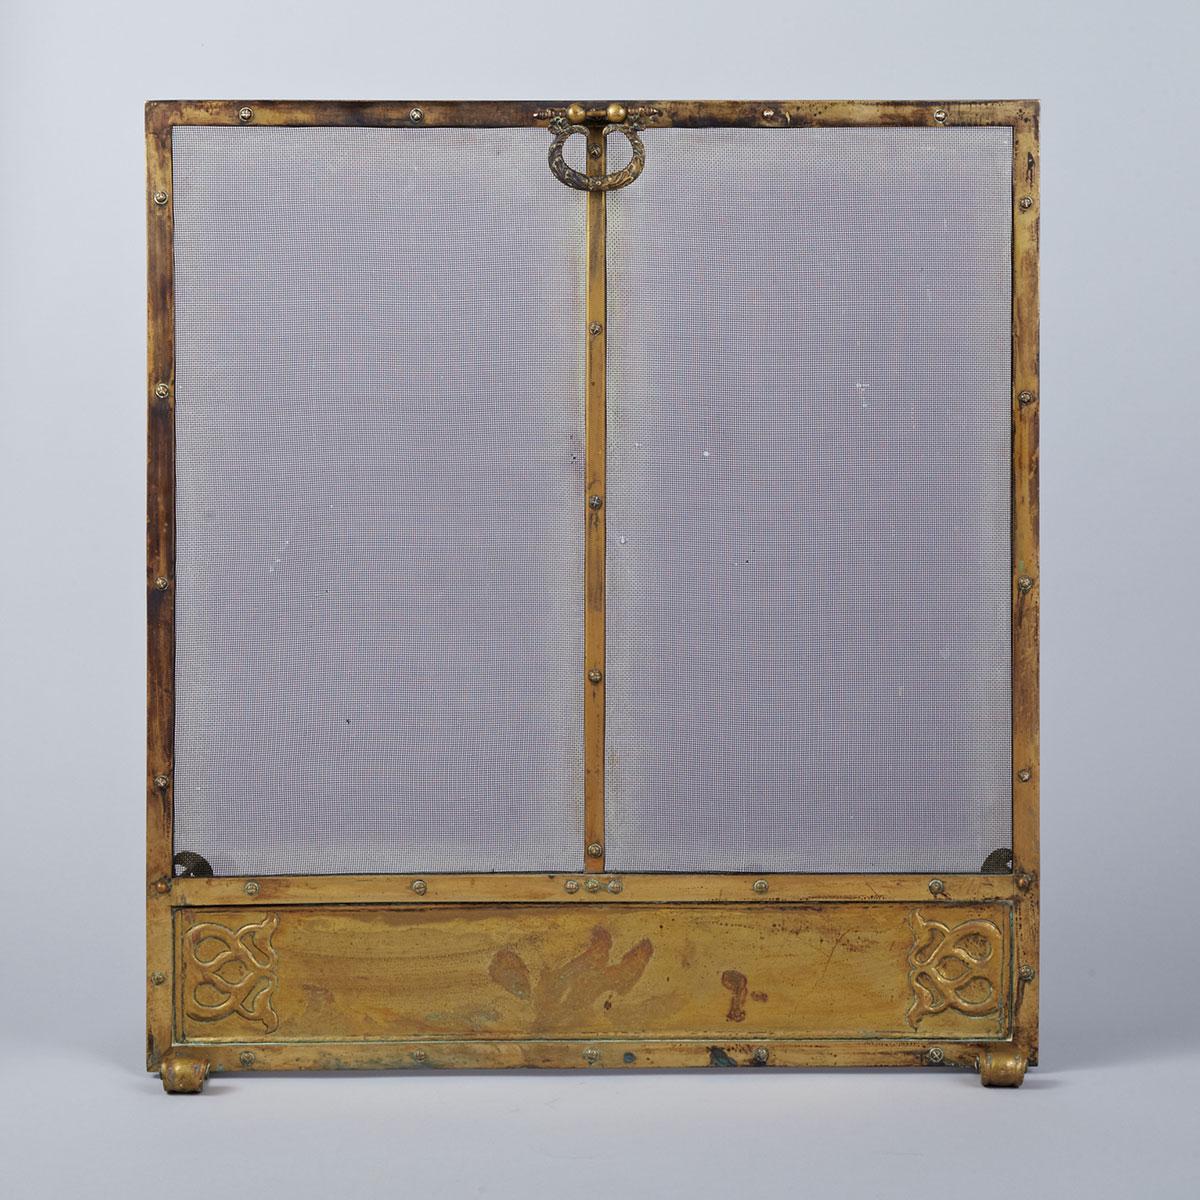 Paul Beau (Canadian, 1871-1941), Wrought and Cast Brass Fire Screen, c.1925